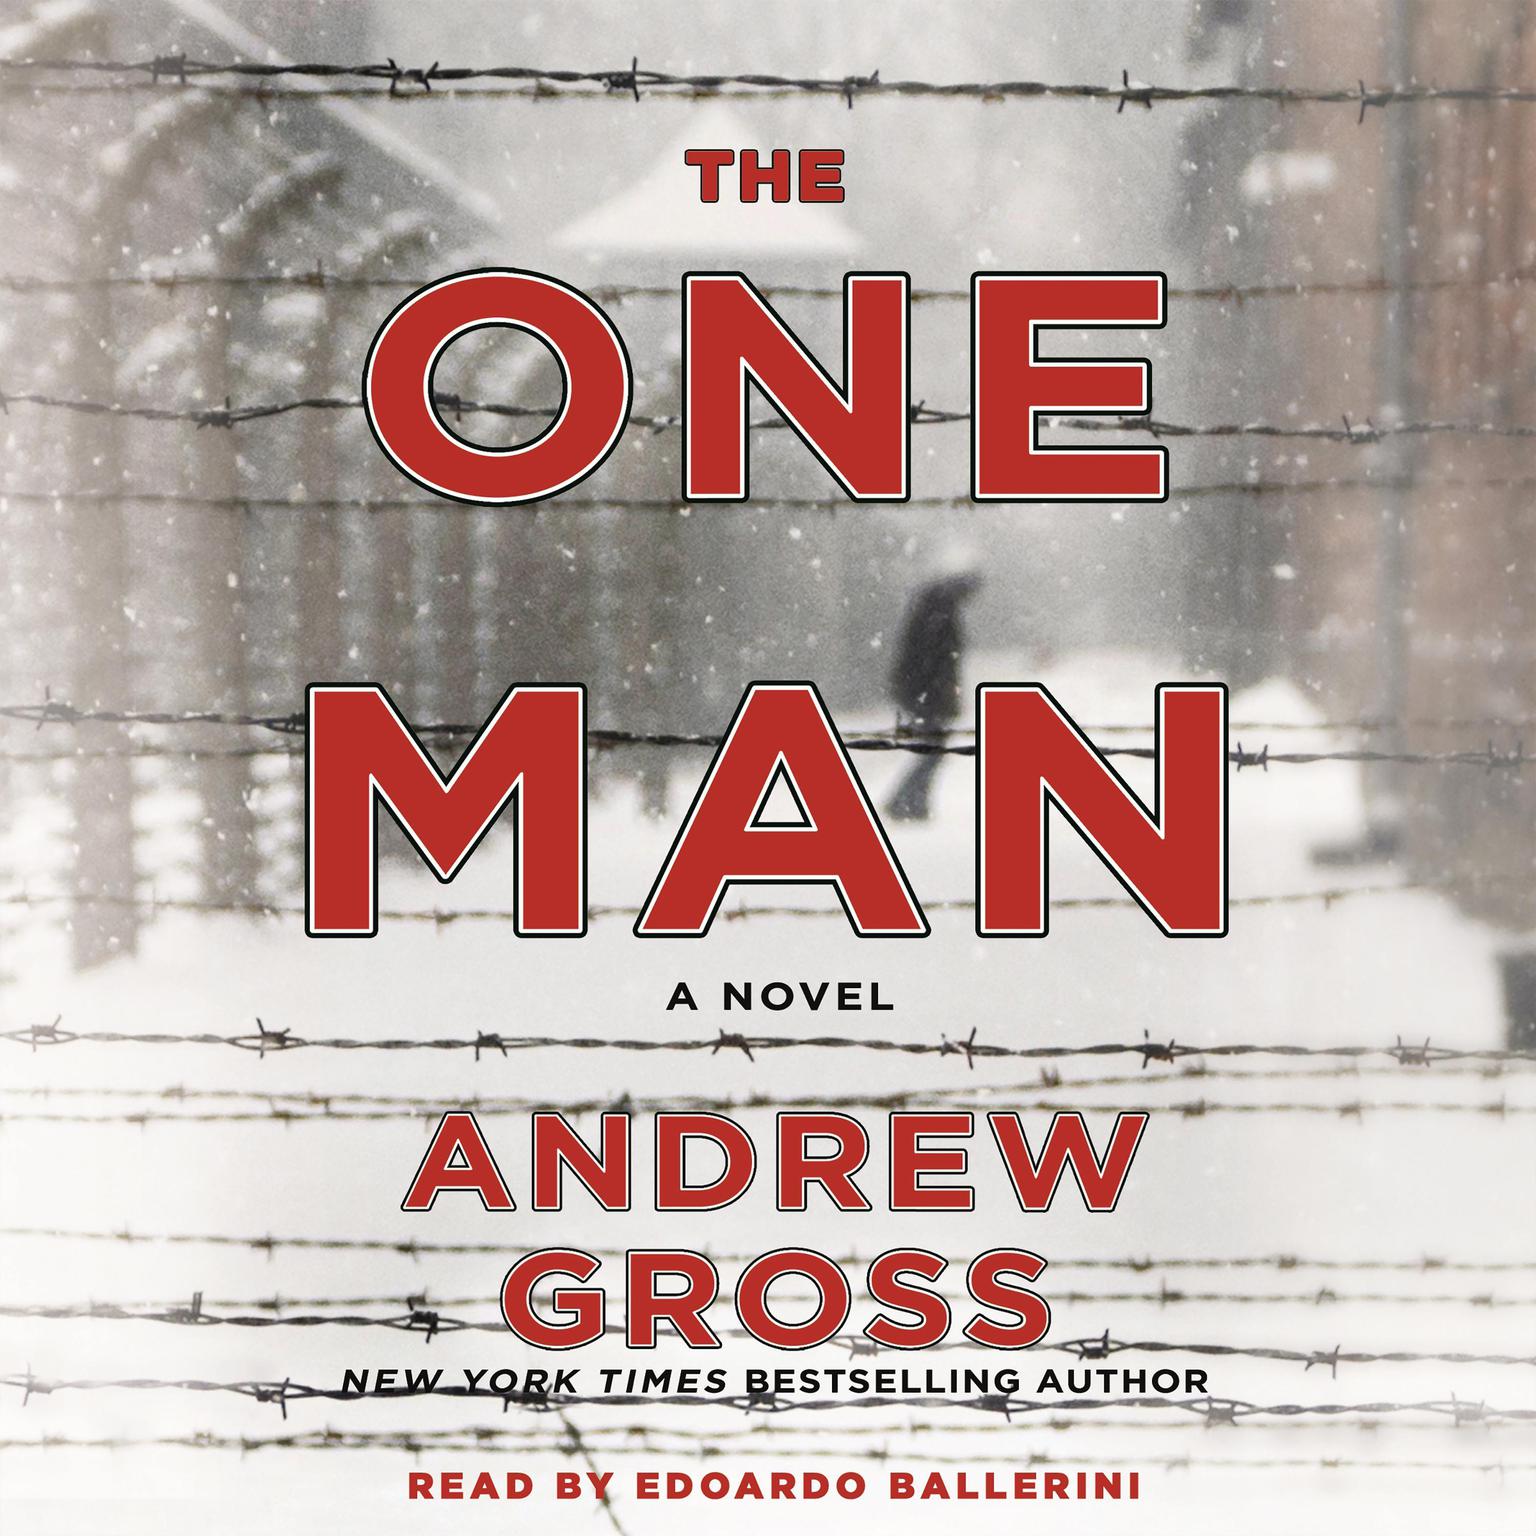 The One Man: The Riveting and Intense Bestselling WWII Thriller Audiobook, by Andrew Gross